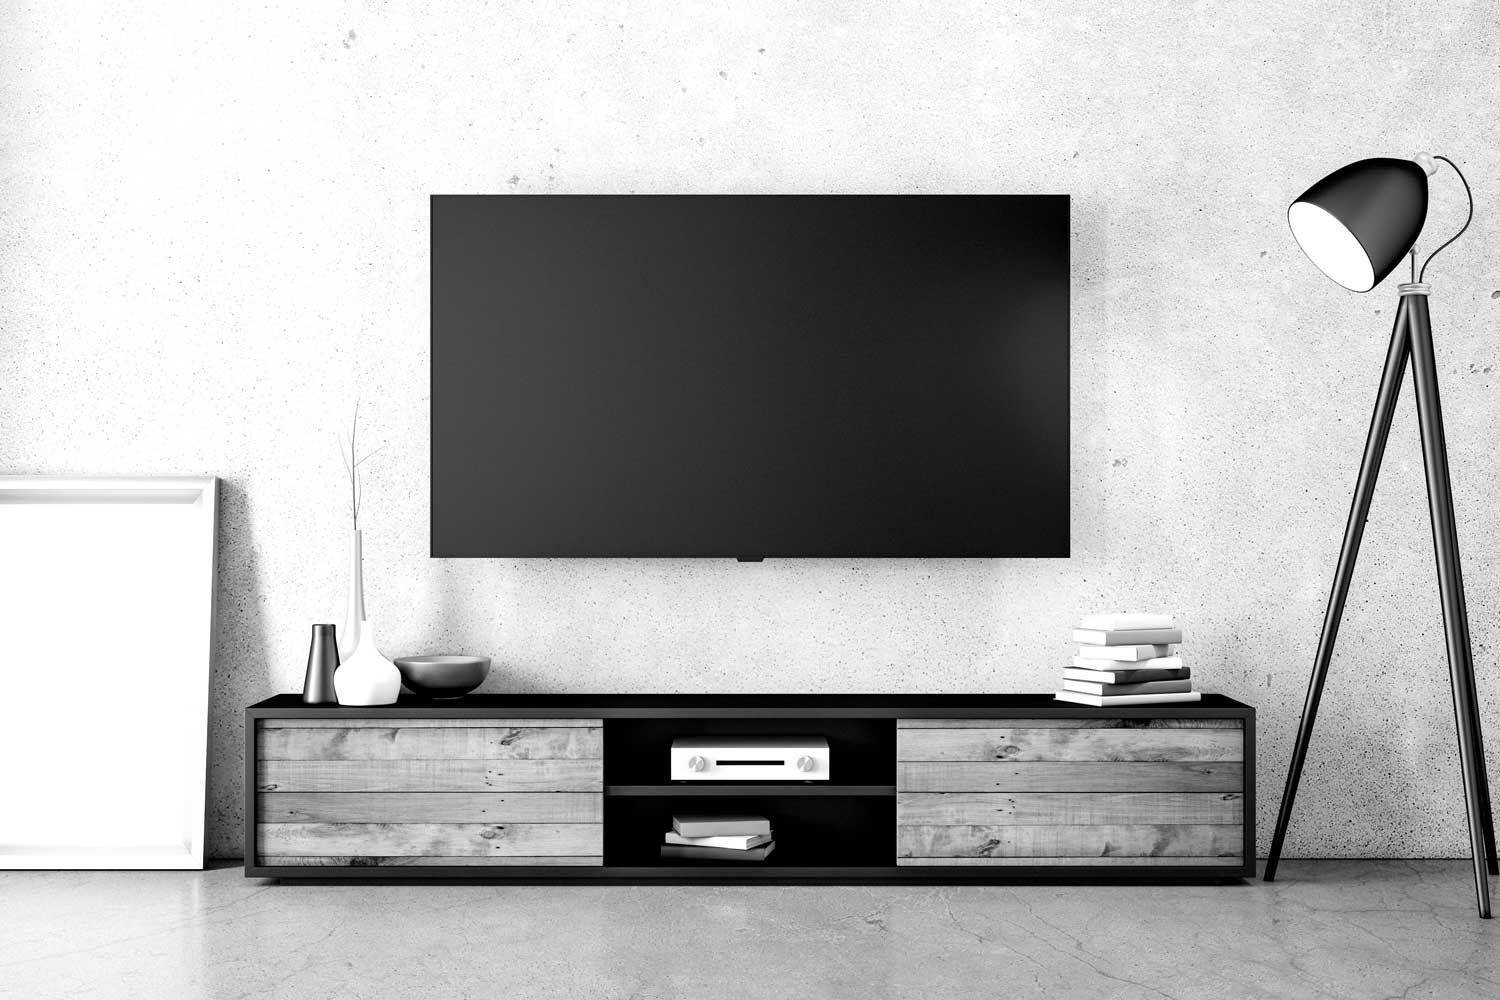 How To Mount A Flat Screen Tv To A Concrete Wall – Sormat En Pertaining To Stand For Flat Screen (View 14 of 15)